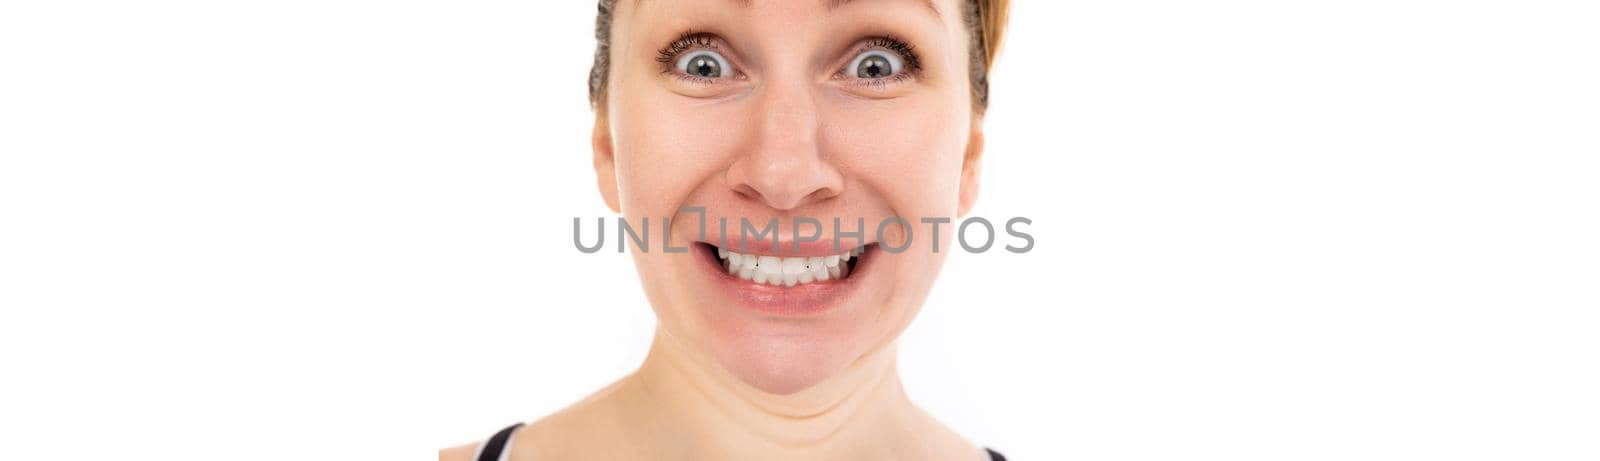 shocked middle-aged woman close-up portrait on white background.